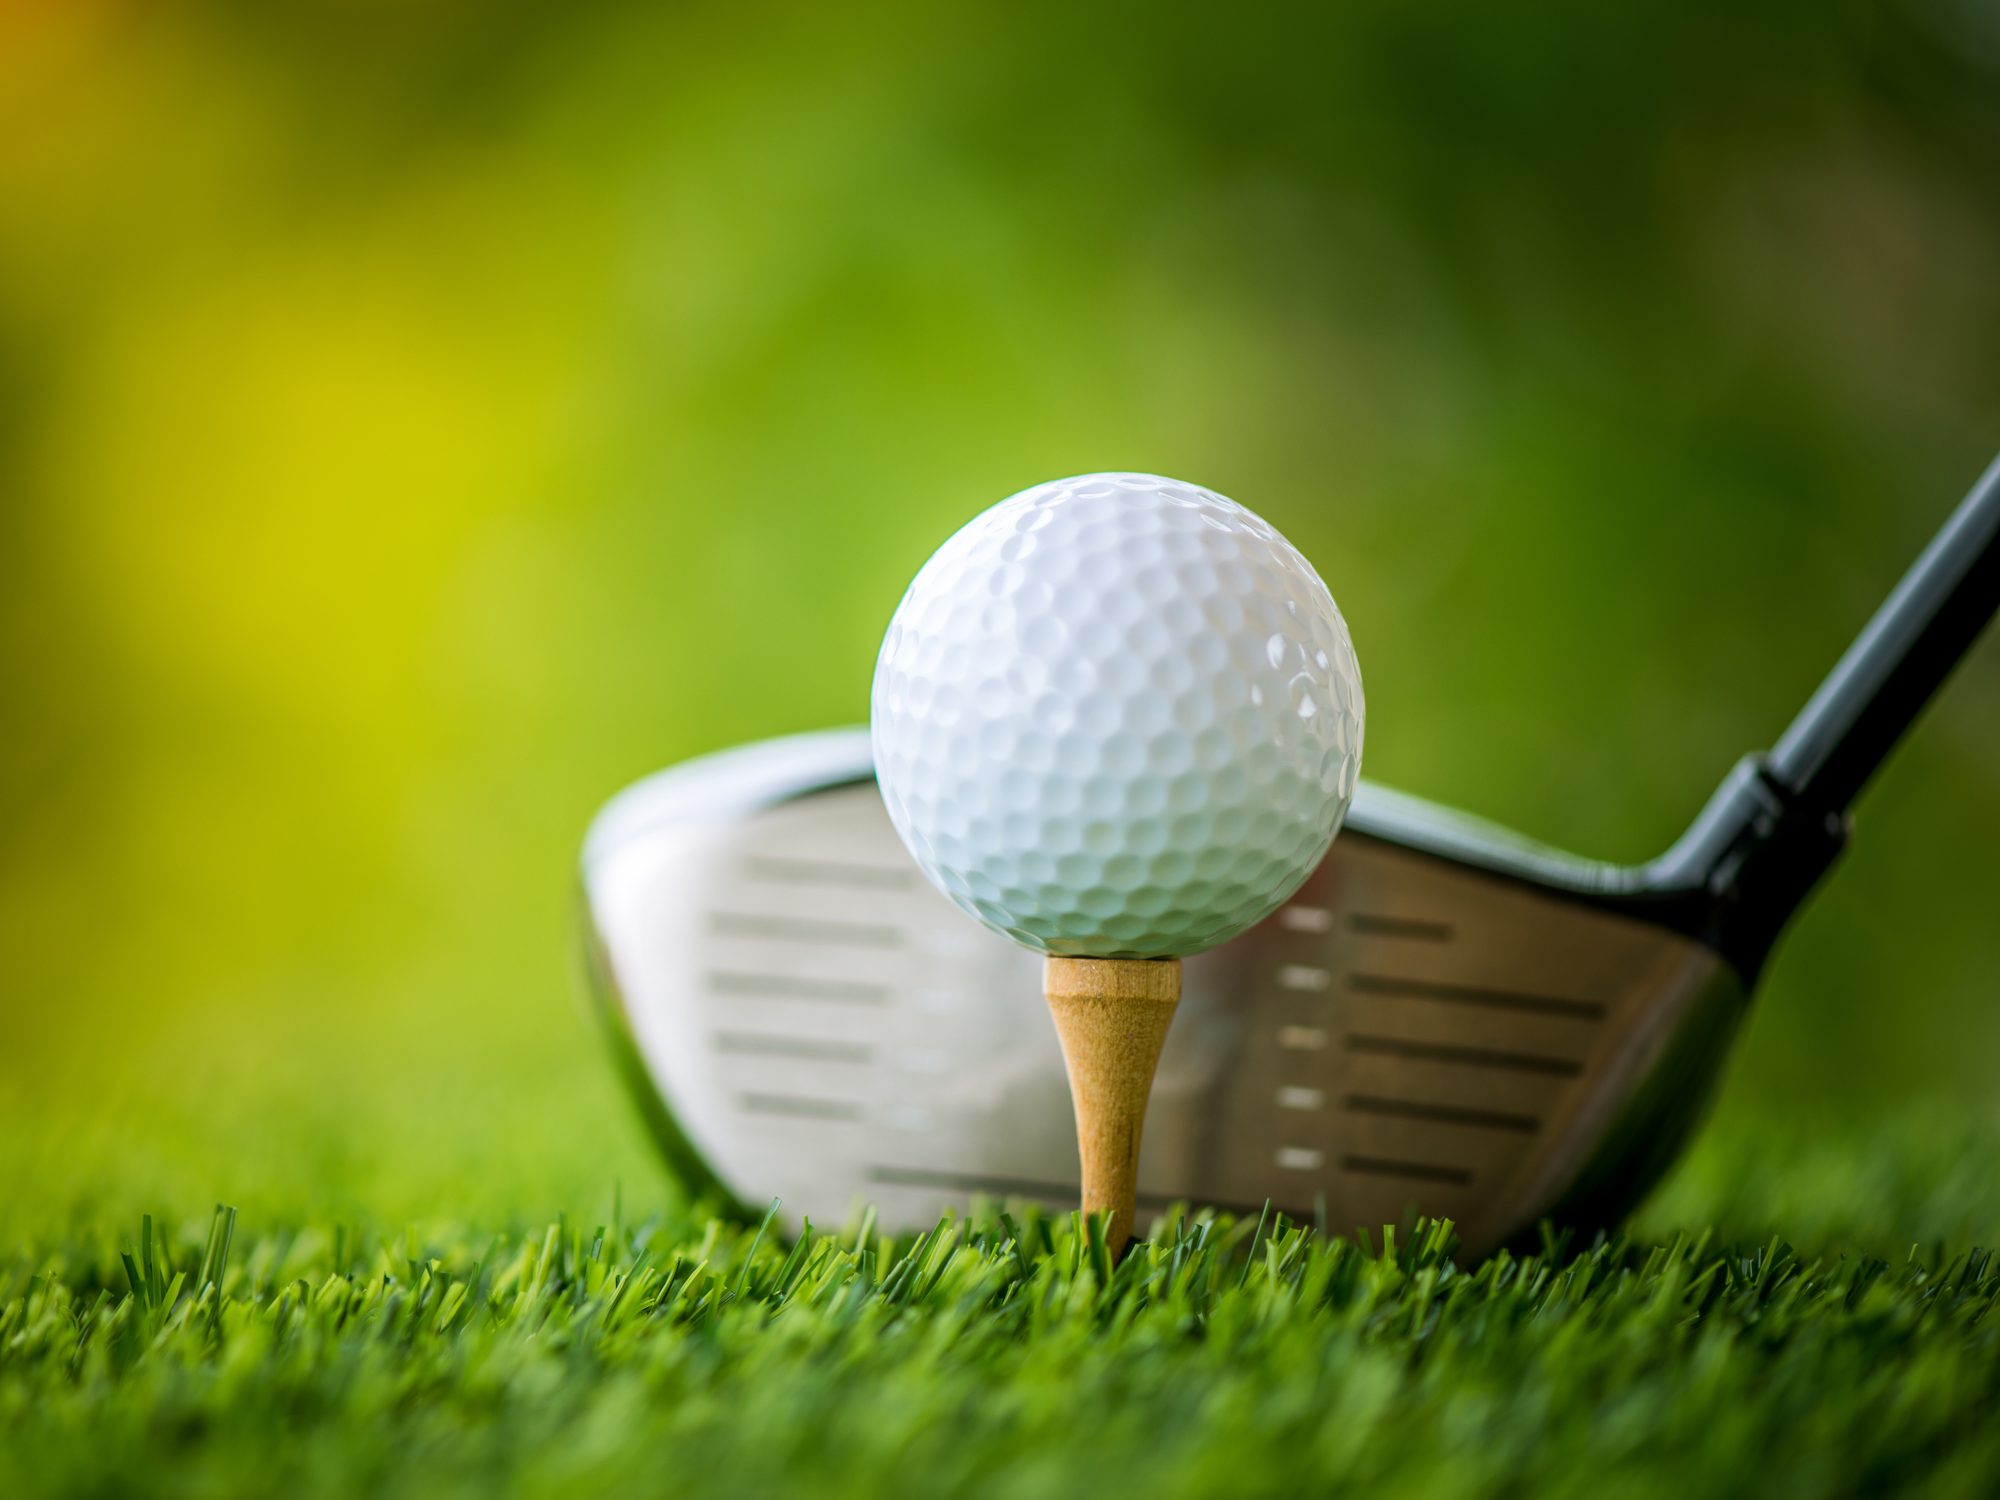 Golf, pesticides and Parkinson’s: How to avoid being poisoned